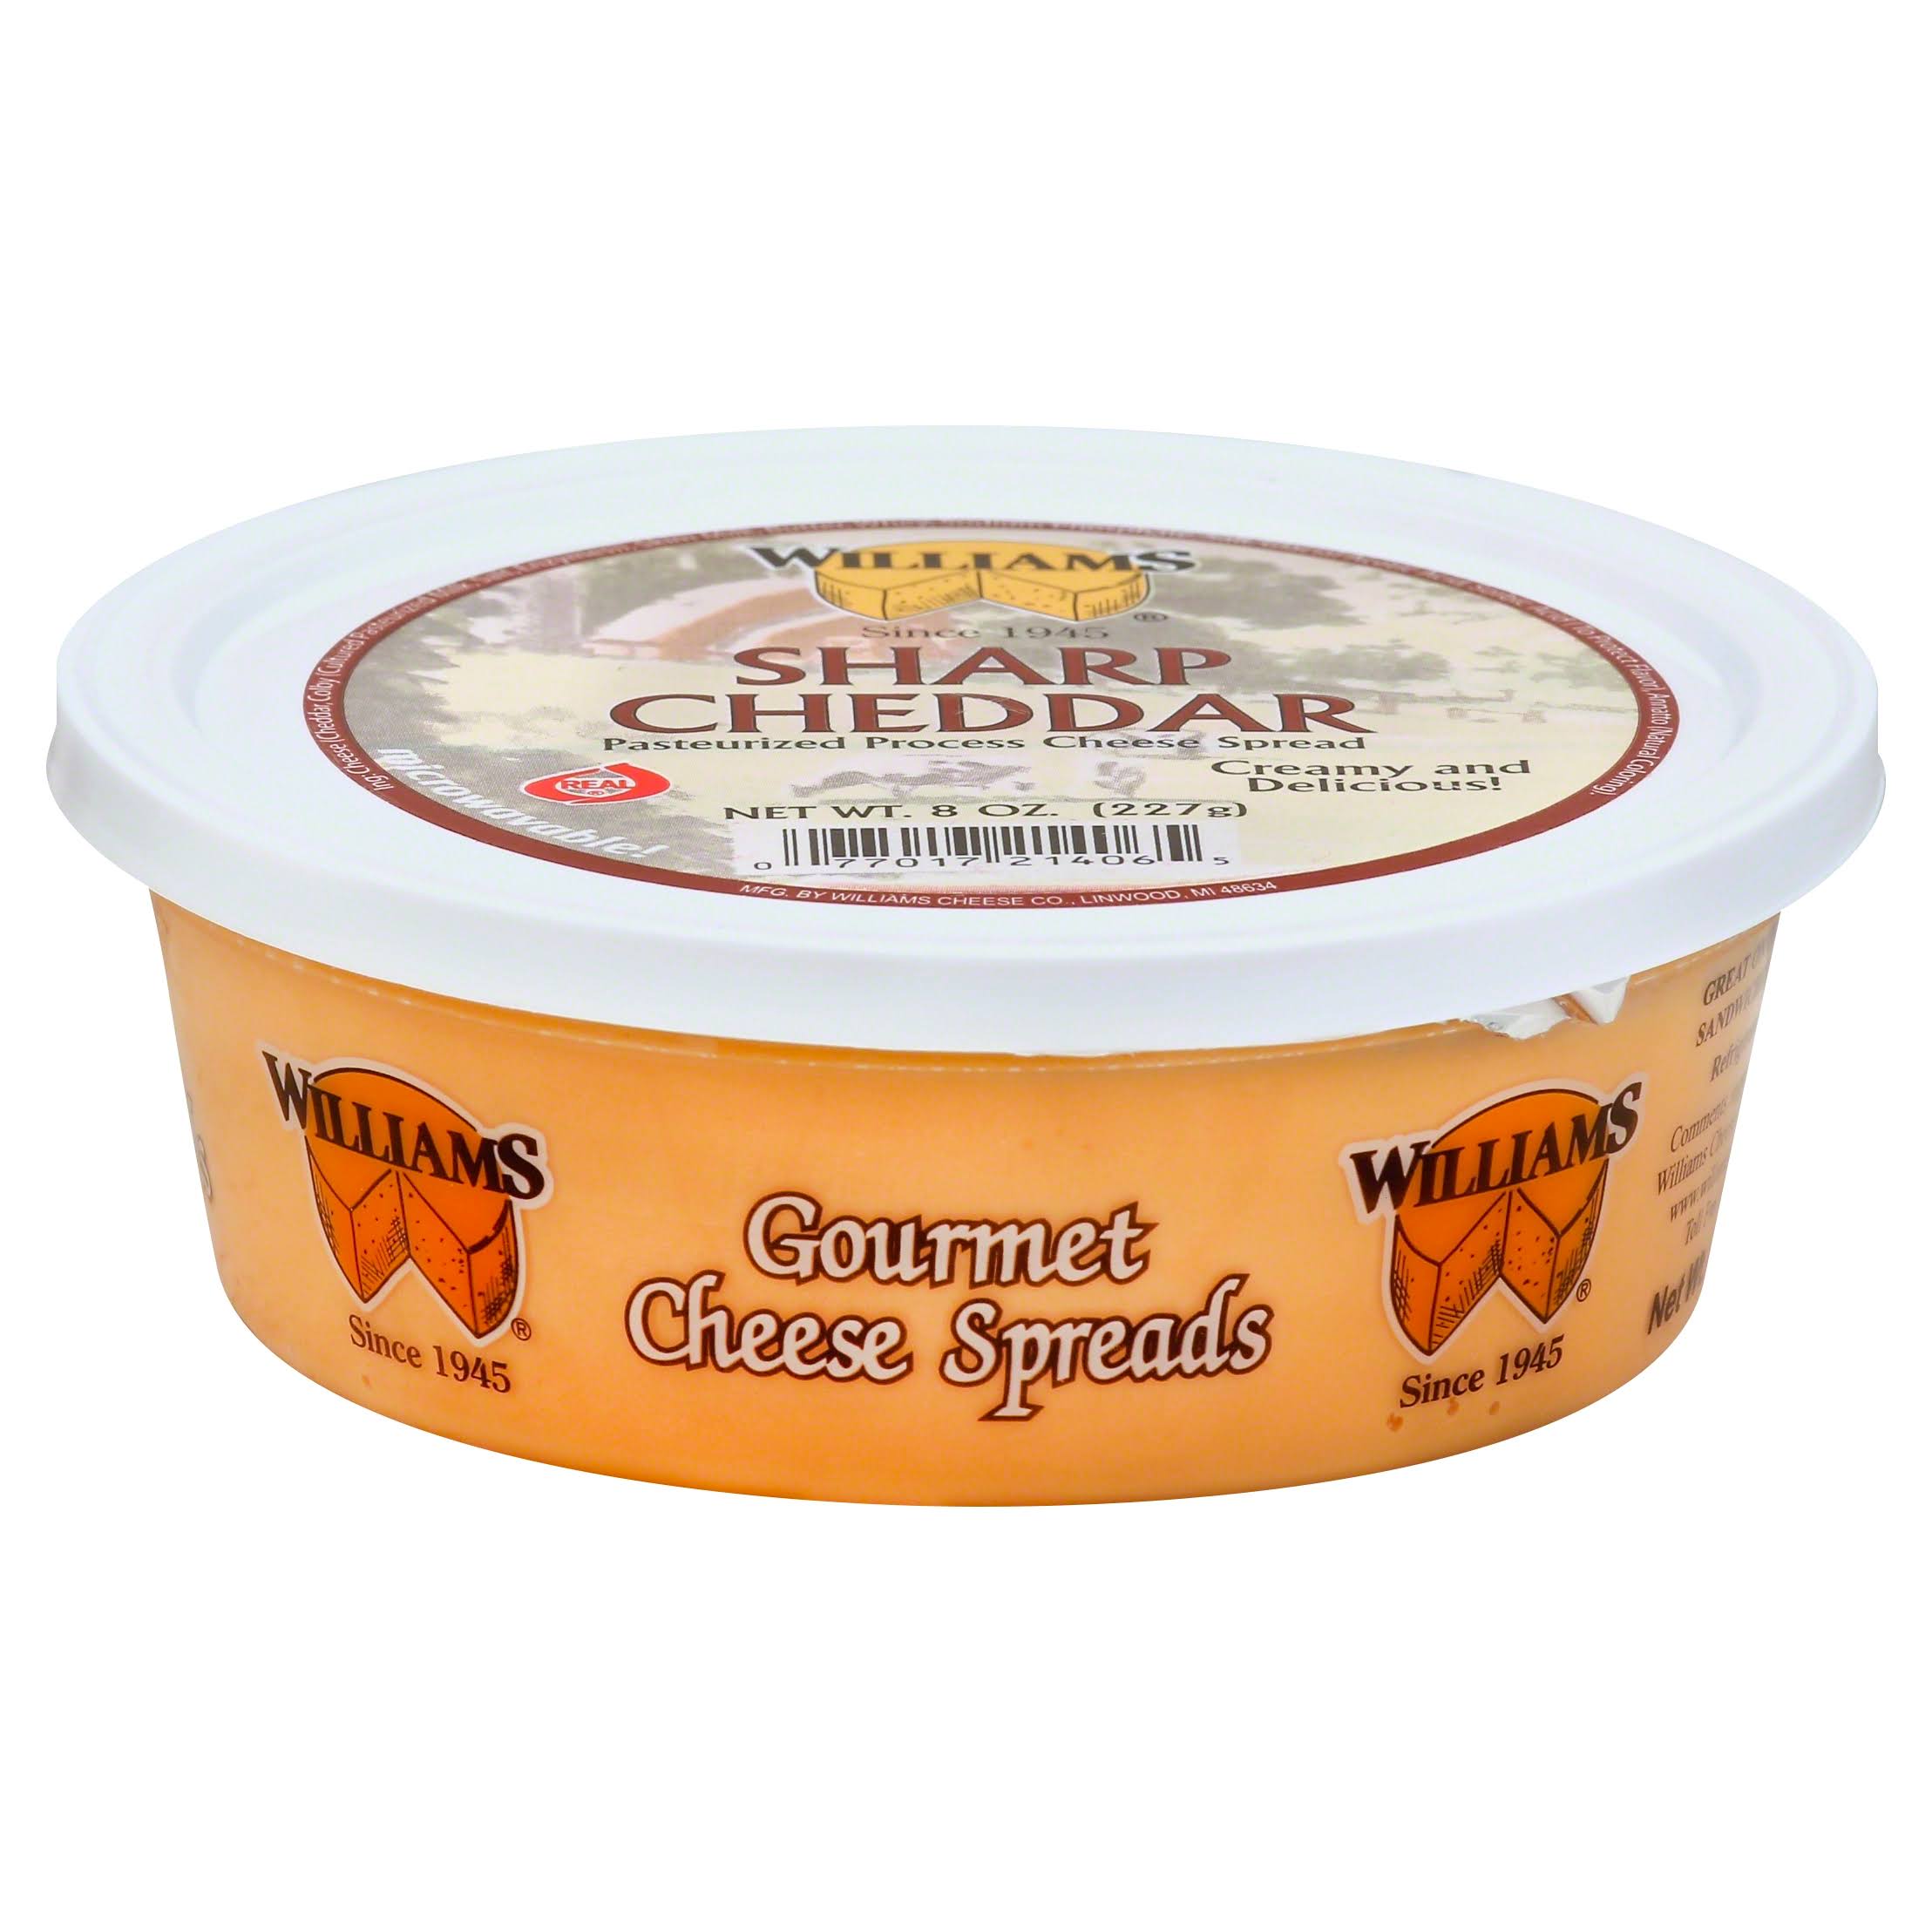 Williams Cheese Spread, Pasteurized Process, Sharp Cheddar - 8 oz